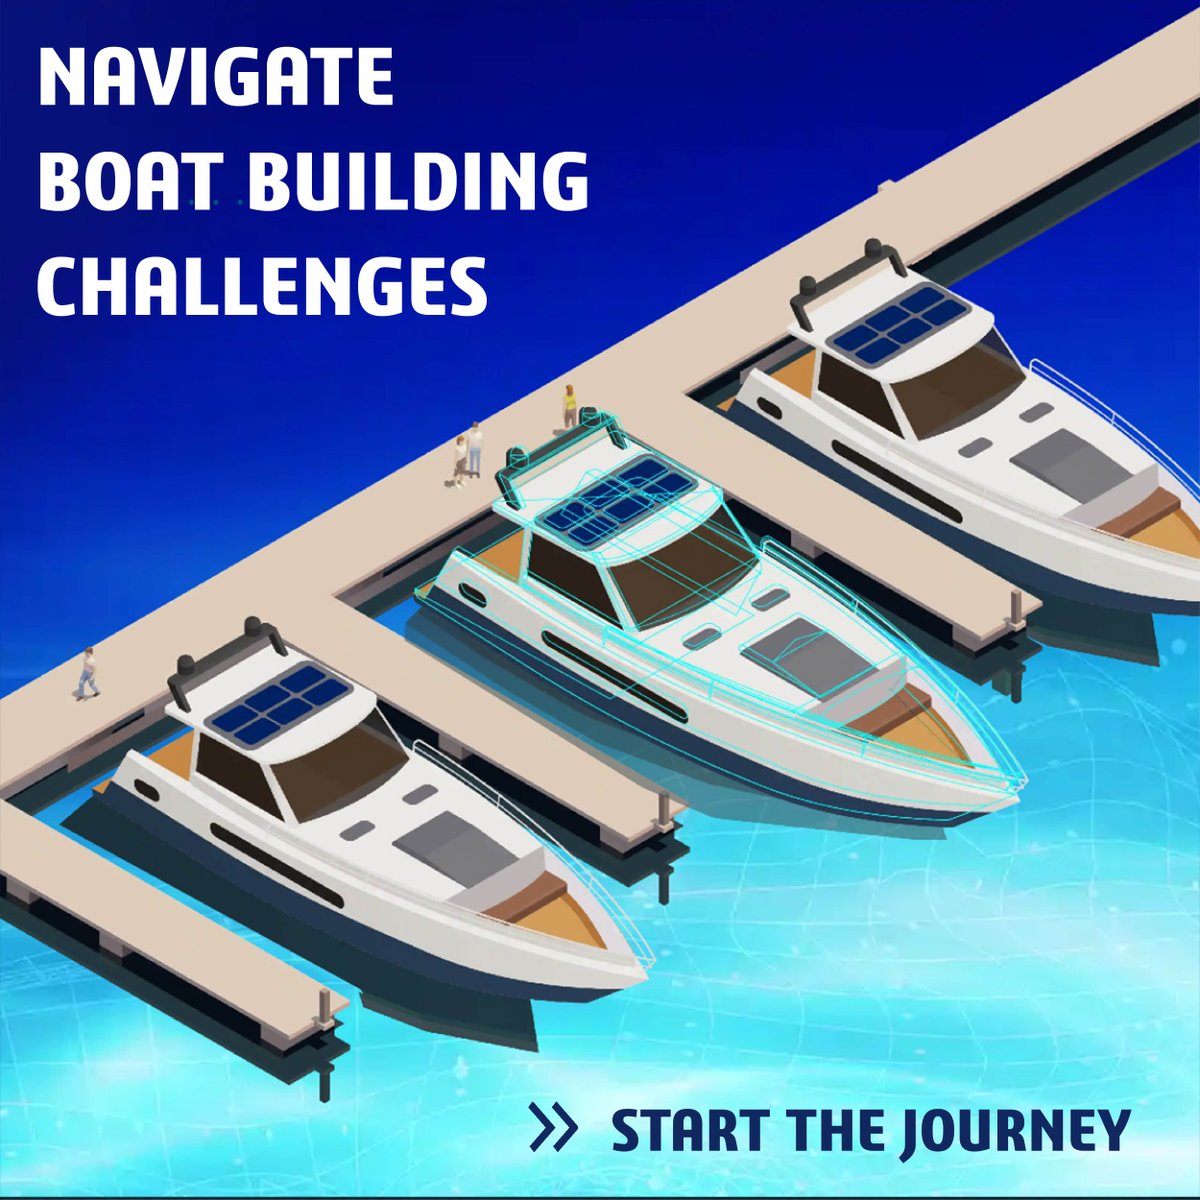 How do boat builders conquer today's challenges?  
Explore cutting-edge solutions and collaborative benefits on our platform that unlocks success.

Navigate boat building challenges >> go.3ds.com/VCH

#boatbuilding #yachtingindustry #dassaultsystèmes